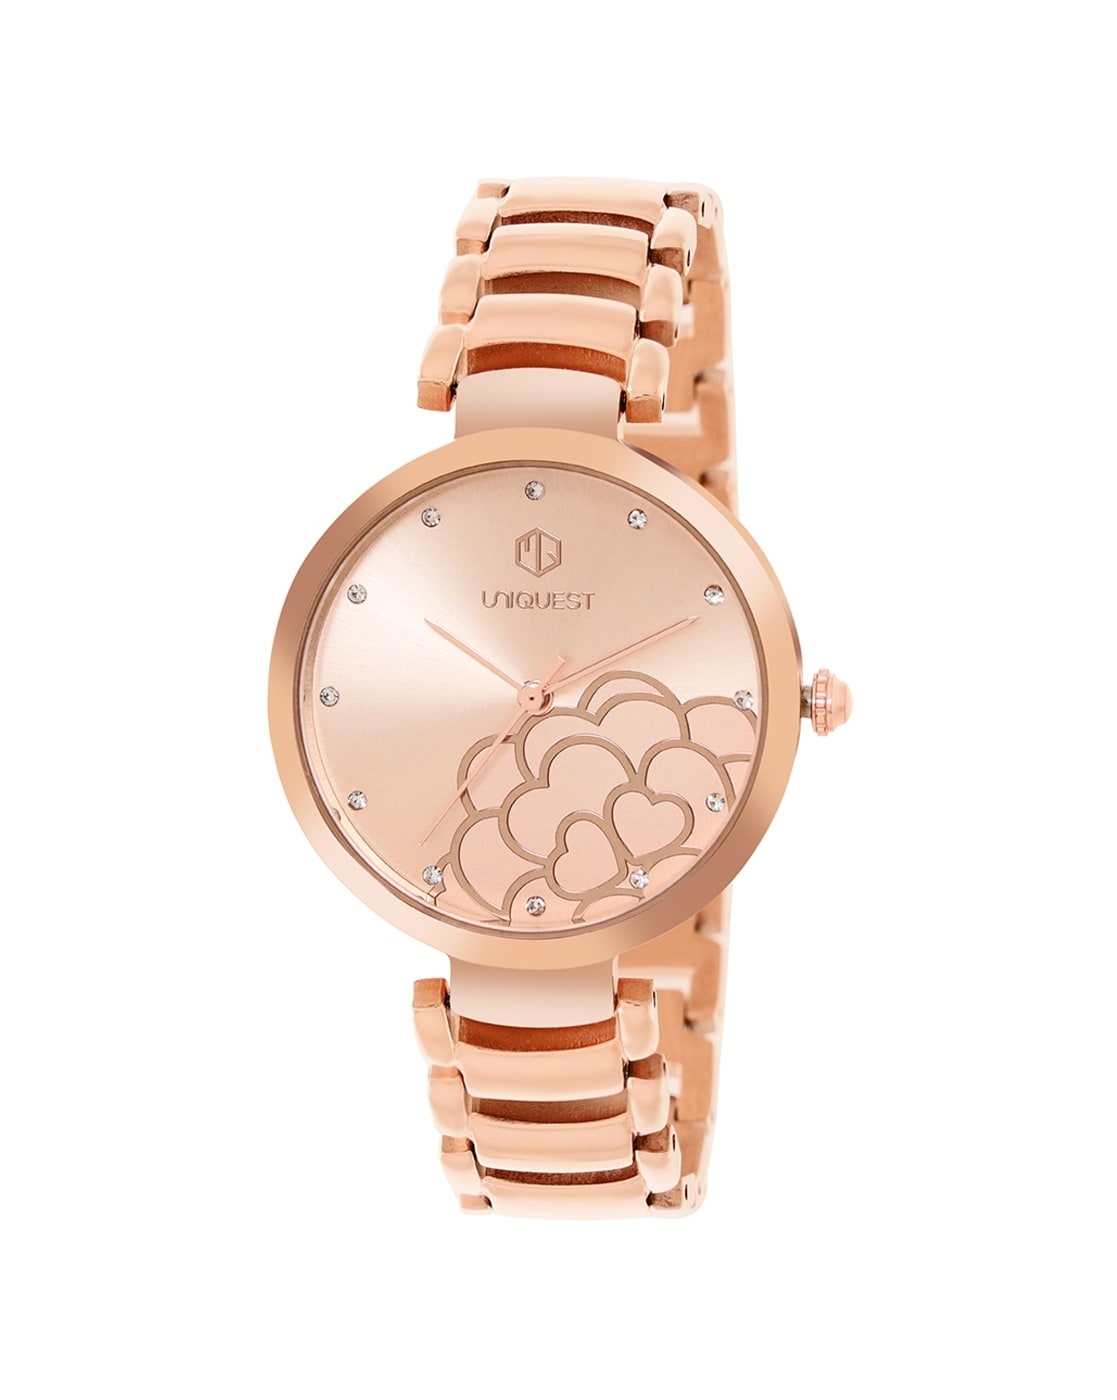 Review of the top 12 luxury women's watches from Watches & Wonders 2022 |  The Jewellery Editor